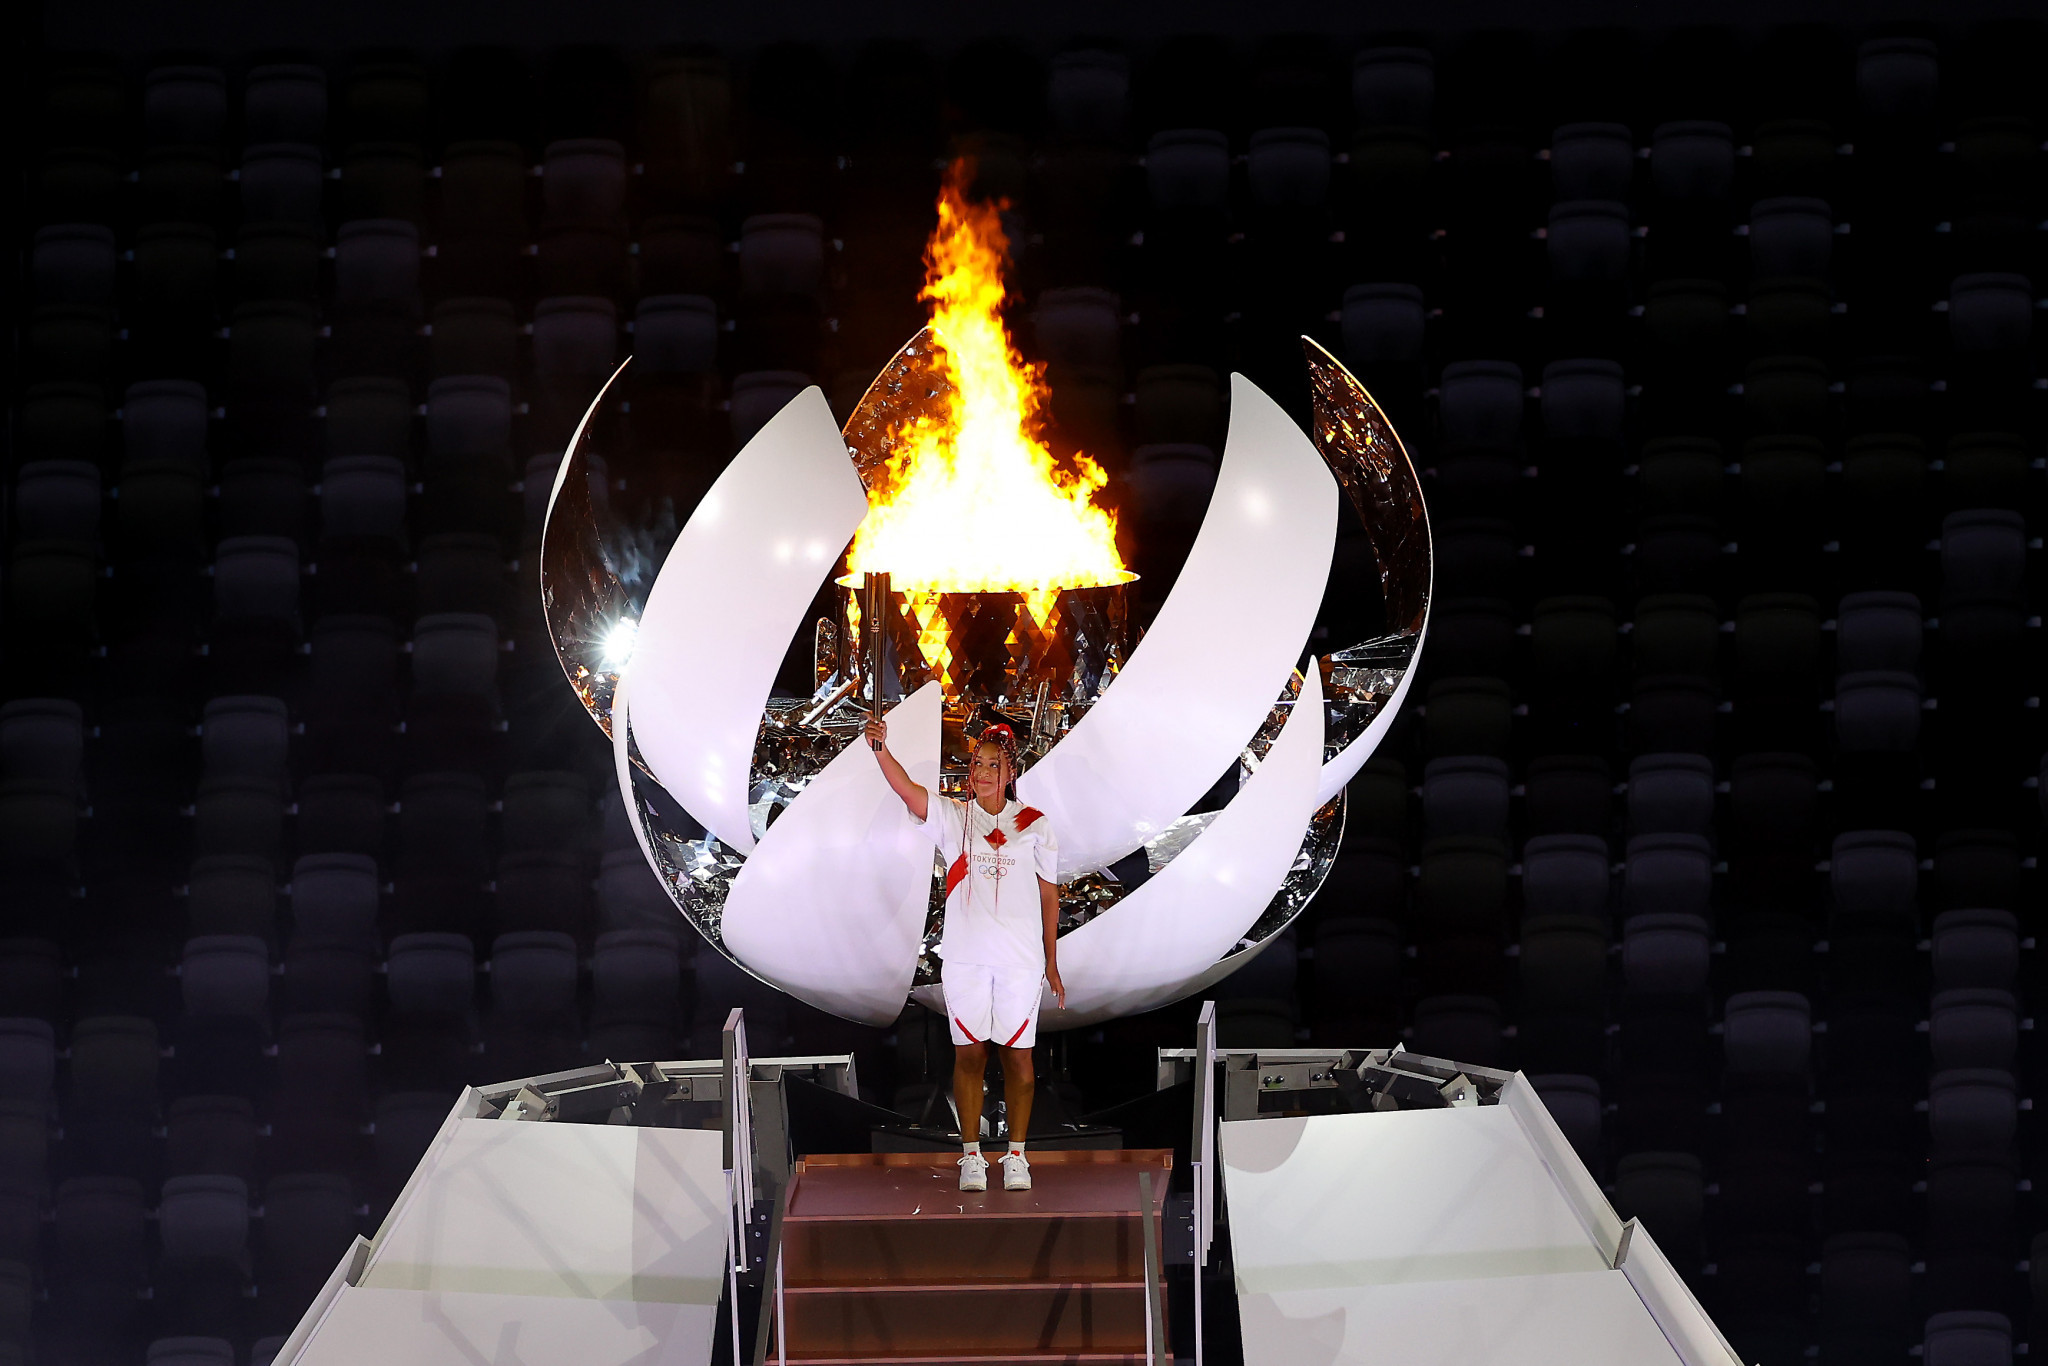 Japanese tennis star Naomi Osaka had the honour of lighting the Olympic Flame during the Tokyo 2020 Opening Ceremony ©Getty Images